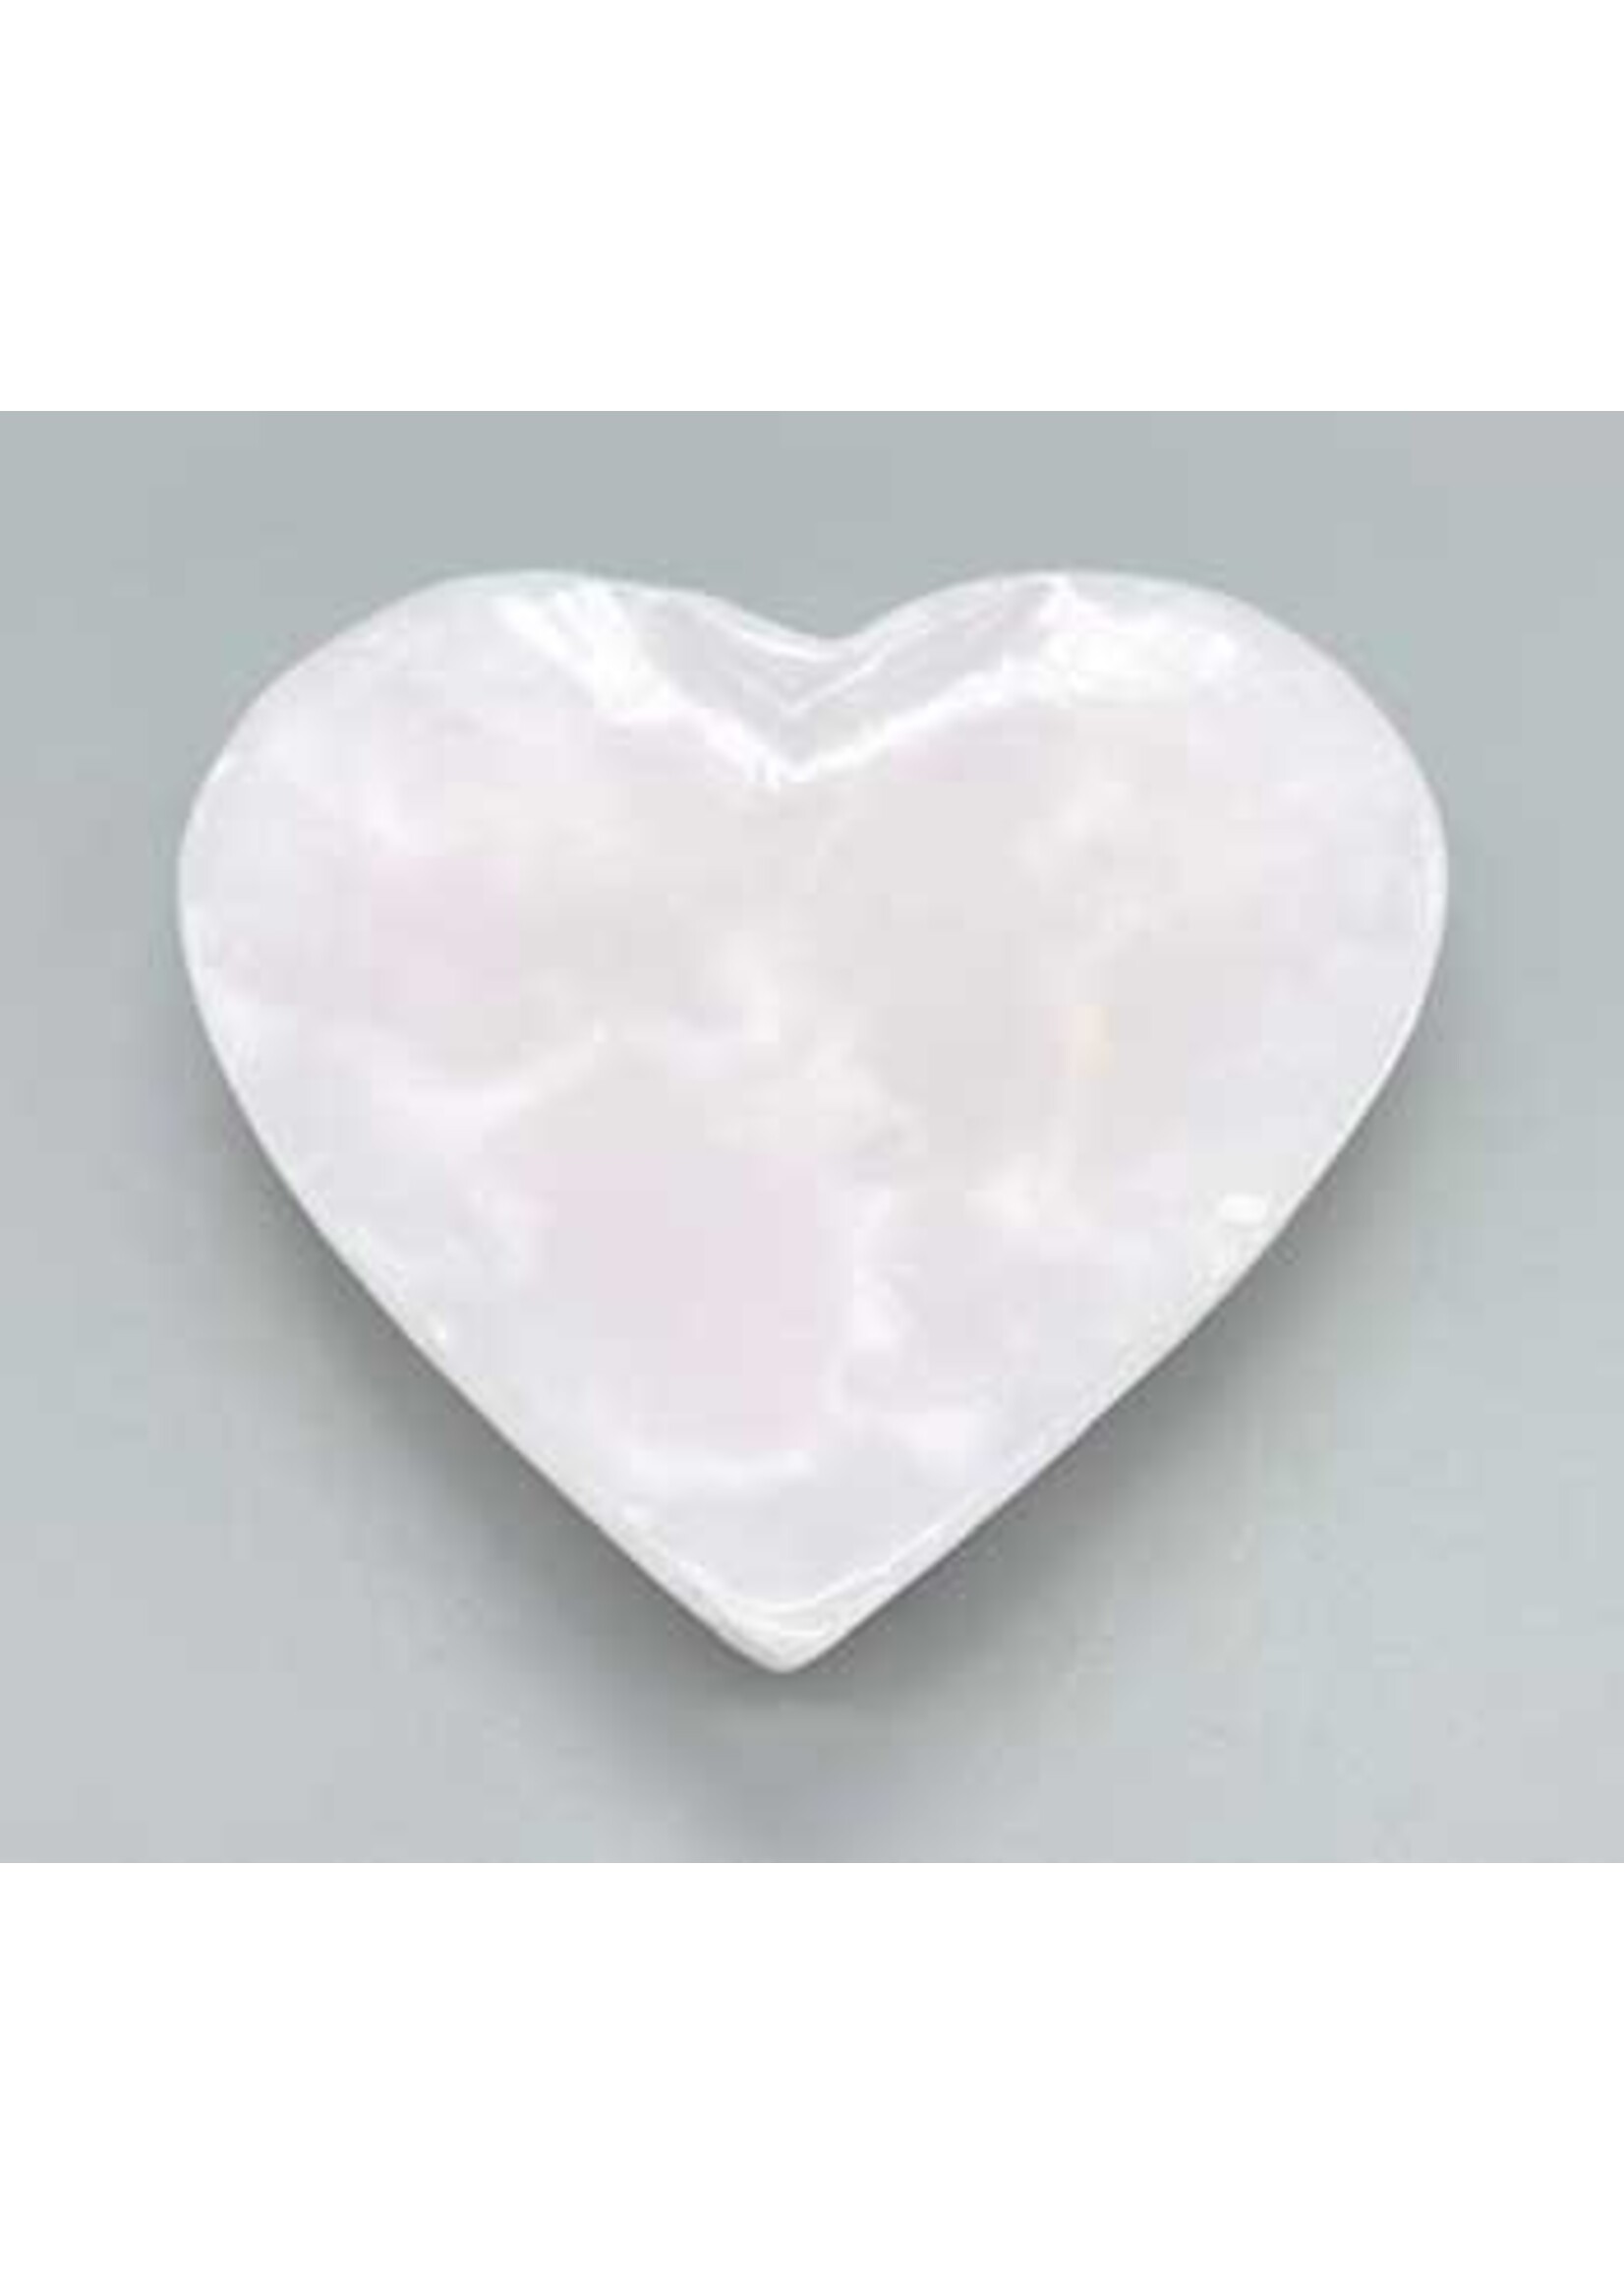 4" Heart Shaped Bowl, Pink Calcite